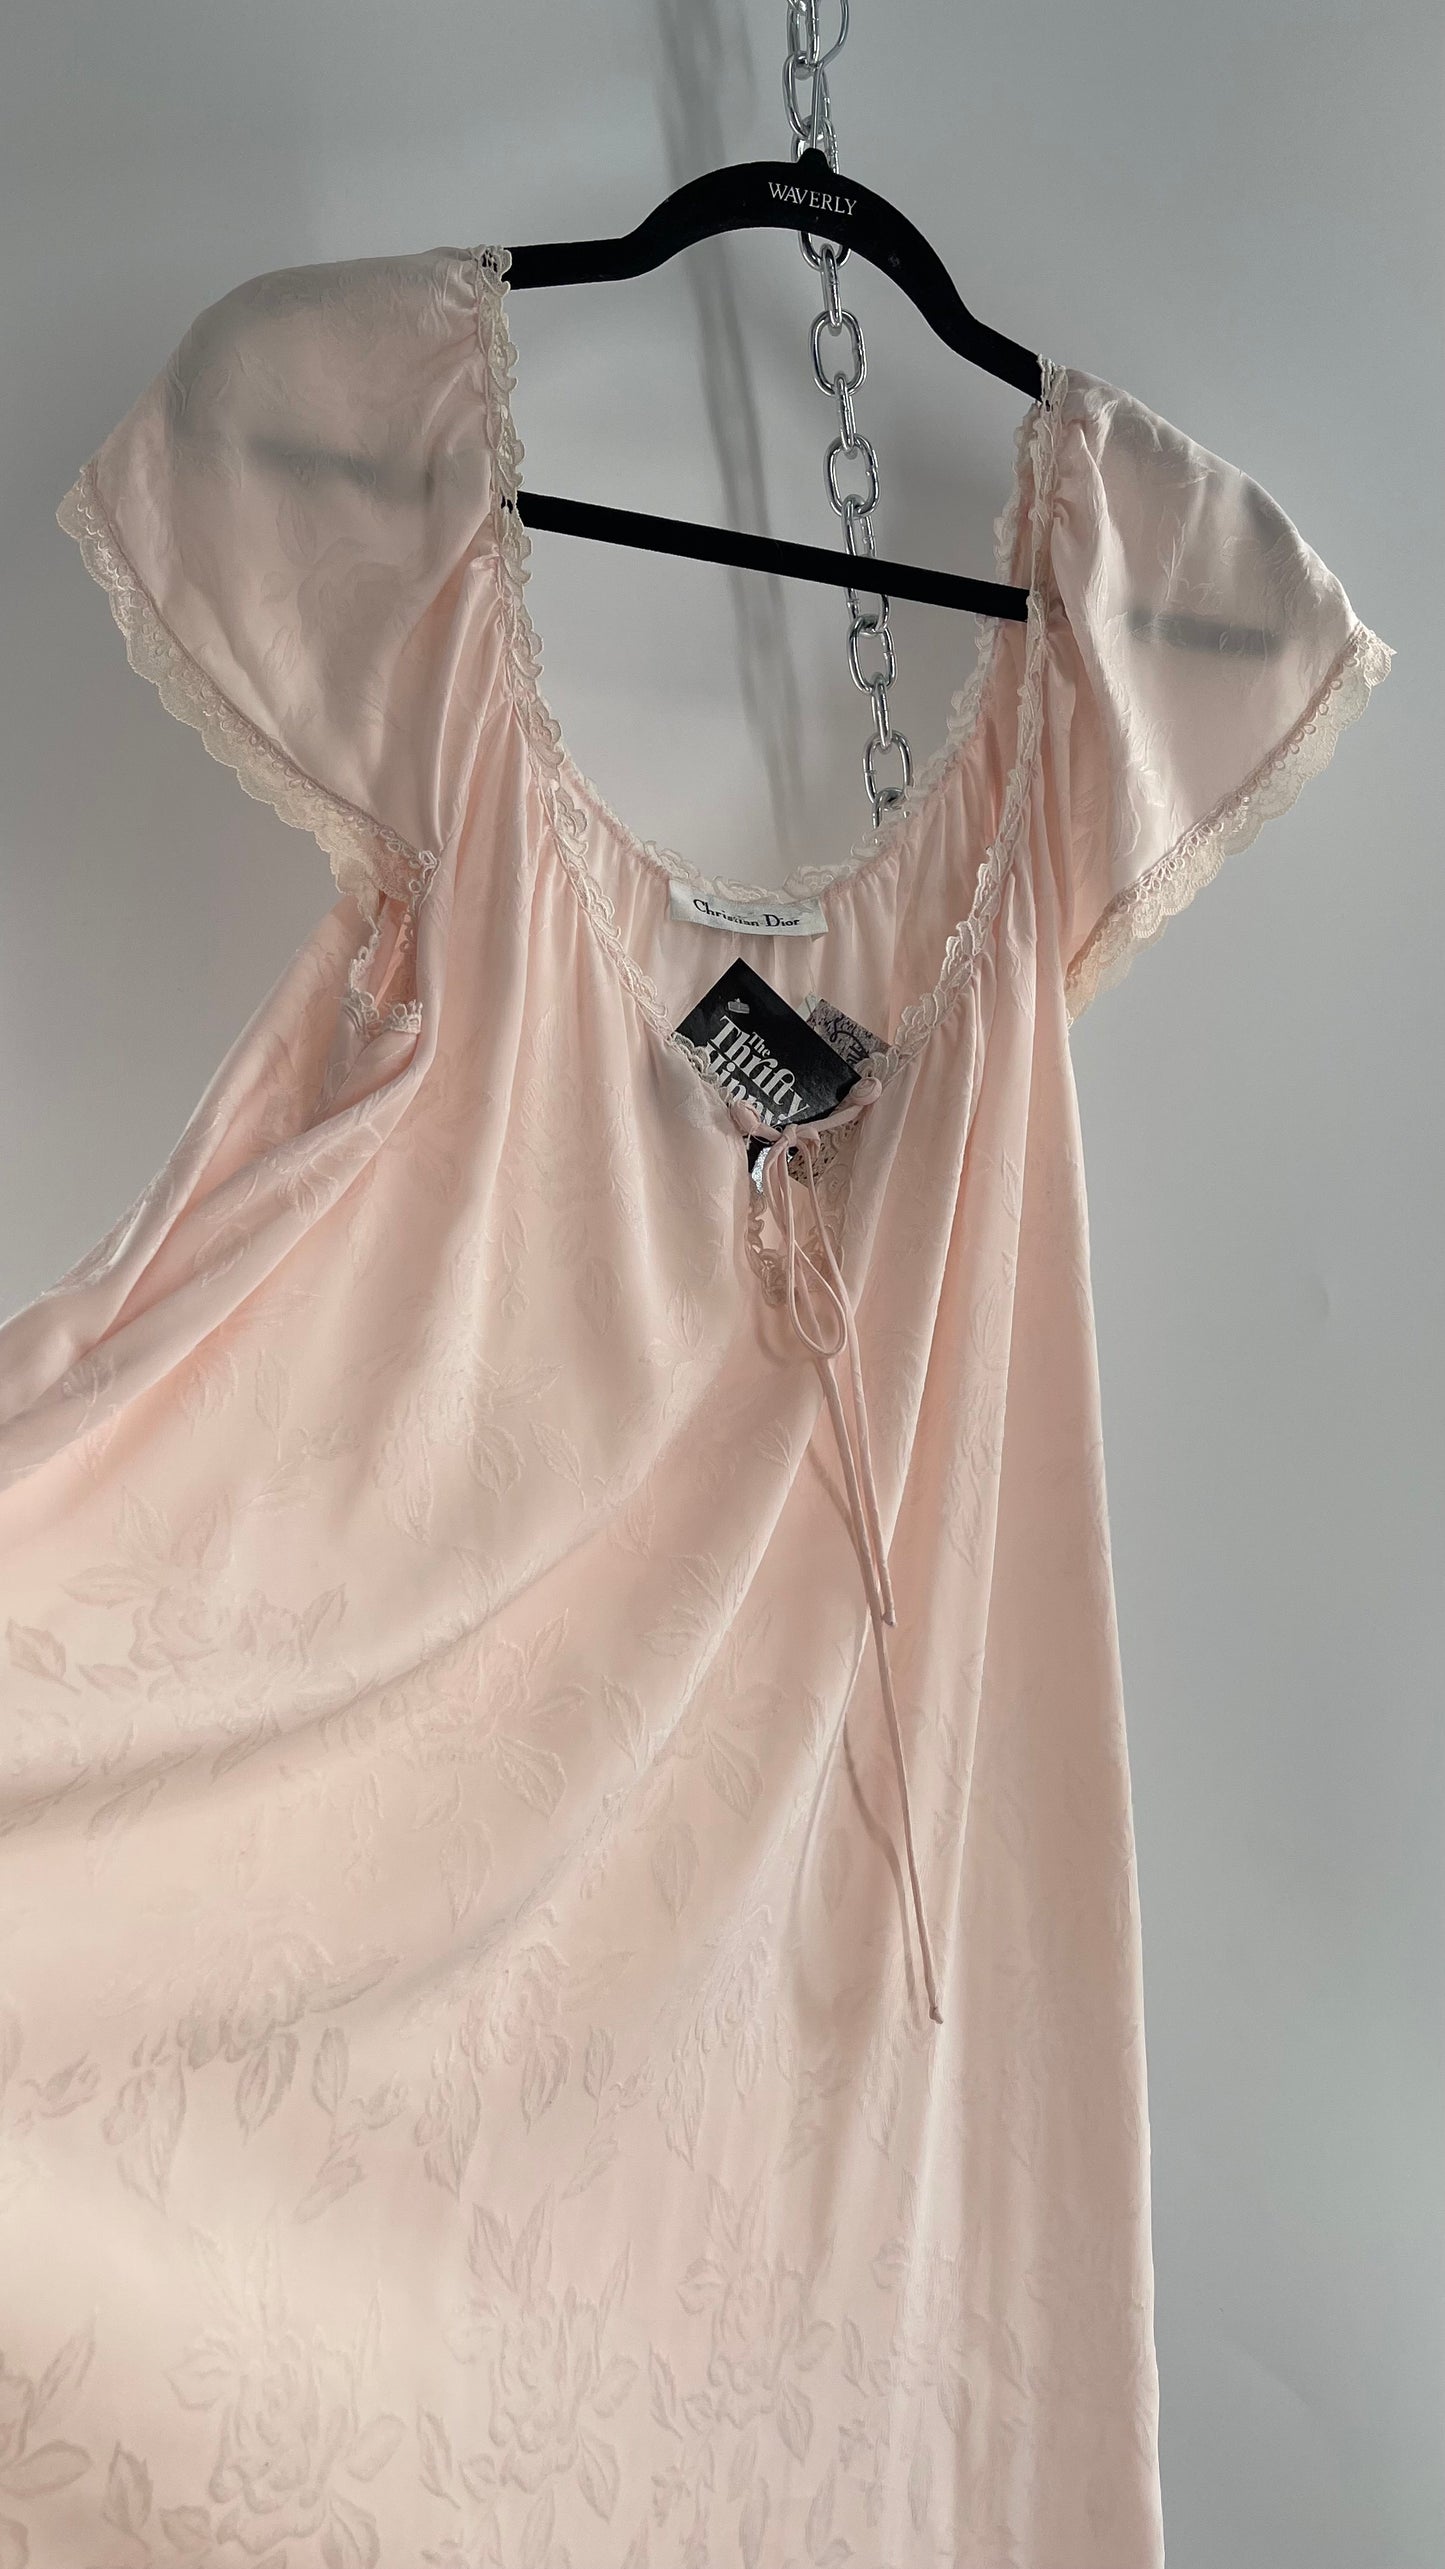 Vintage Christian Dior Pink Night Gown/ Maxi Dress with Floral Embossed Design, Lace Trim and Rosettes (Large)